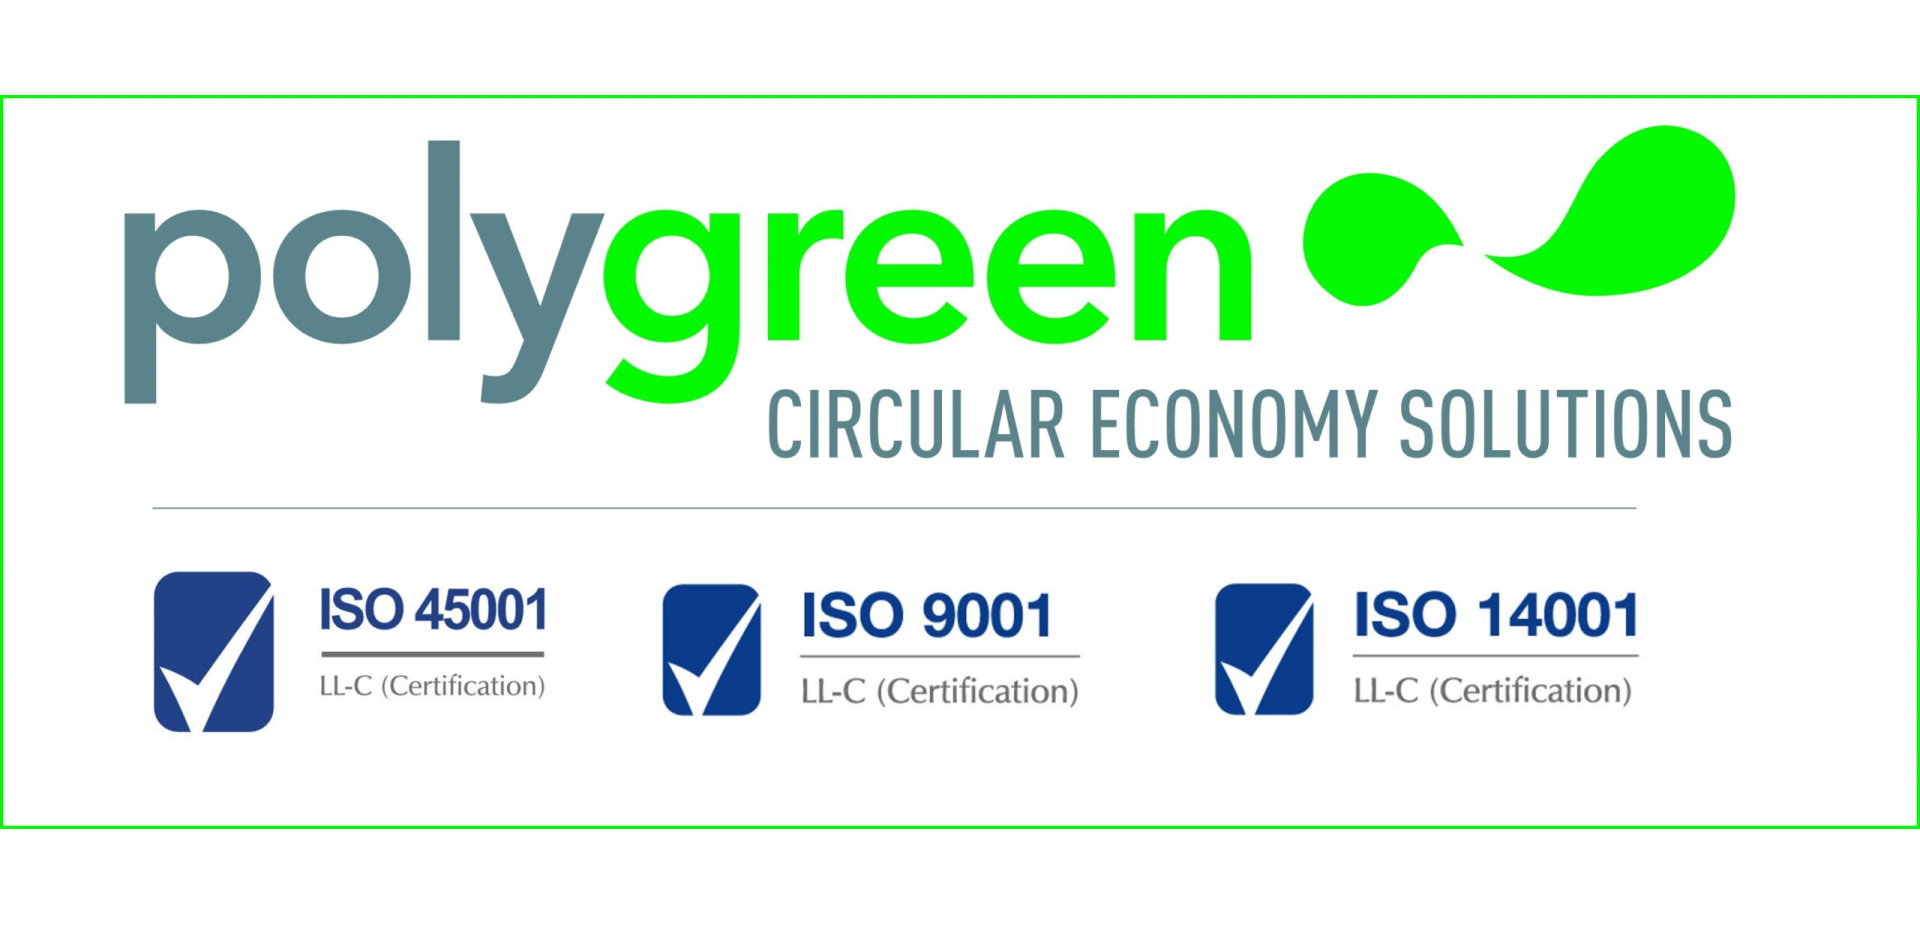 Polygreen: Three certifications for quality, safety and sustainability